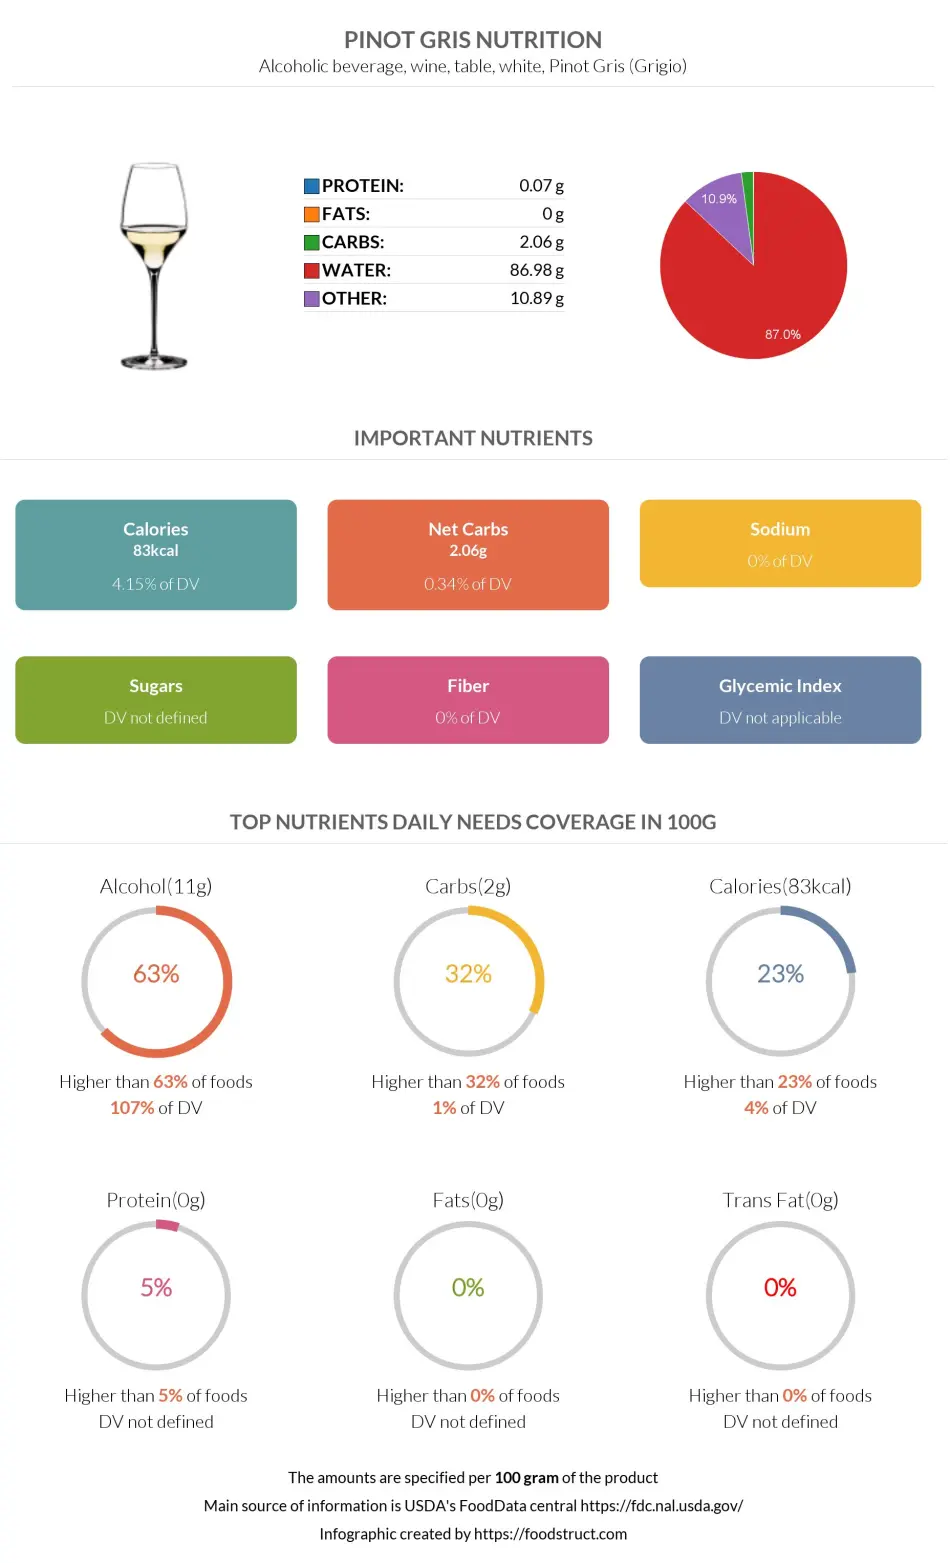 Pinot Gris nutrition infographic